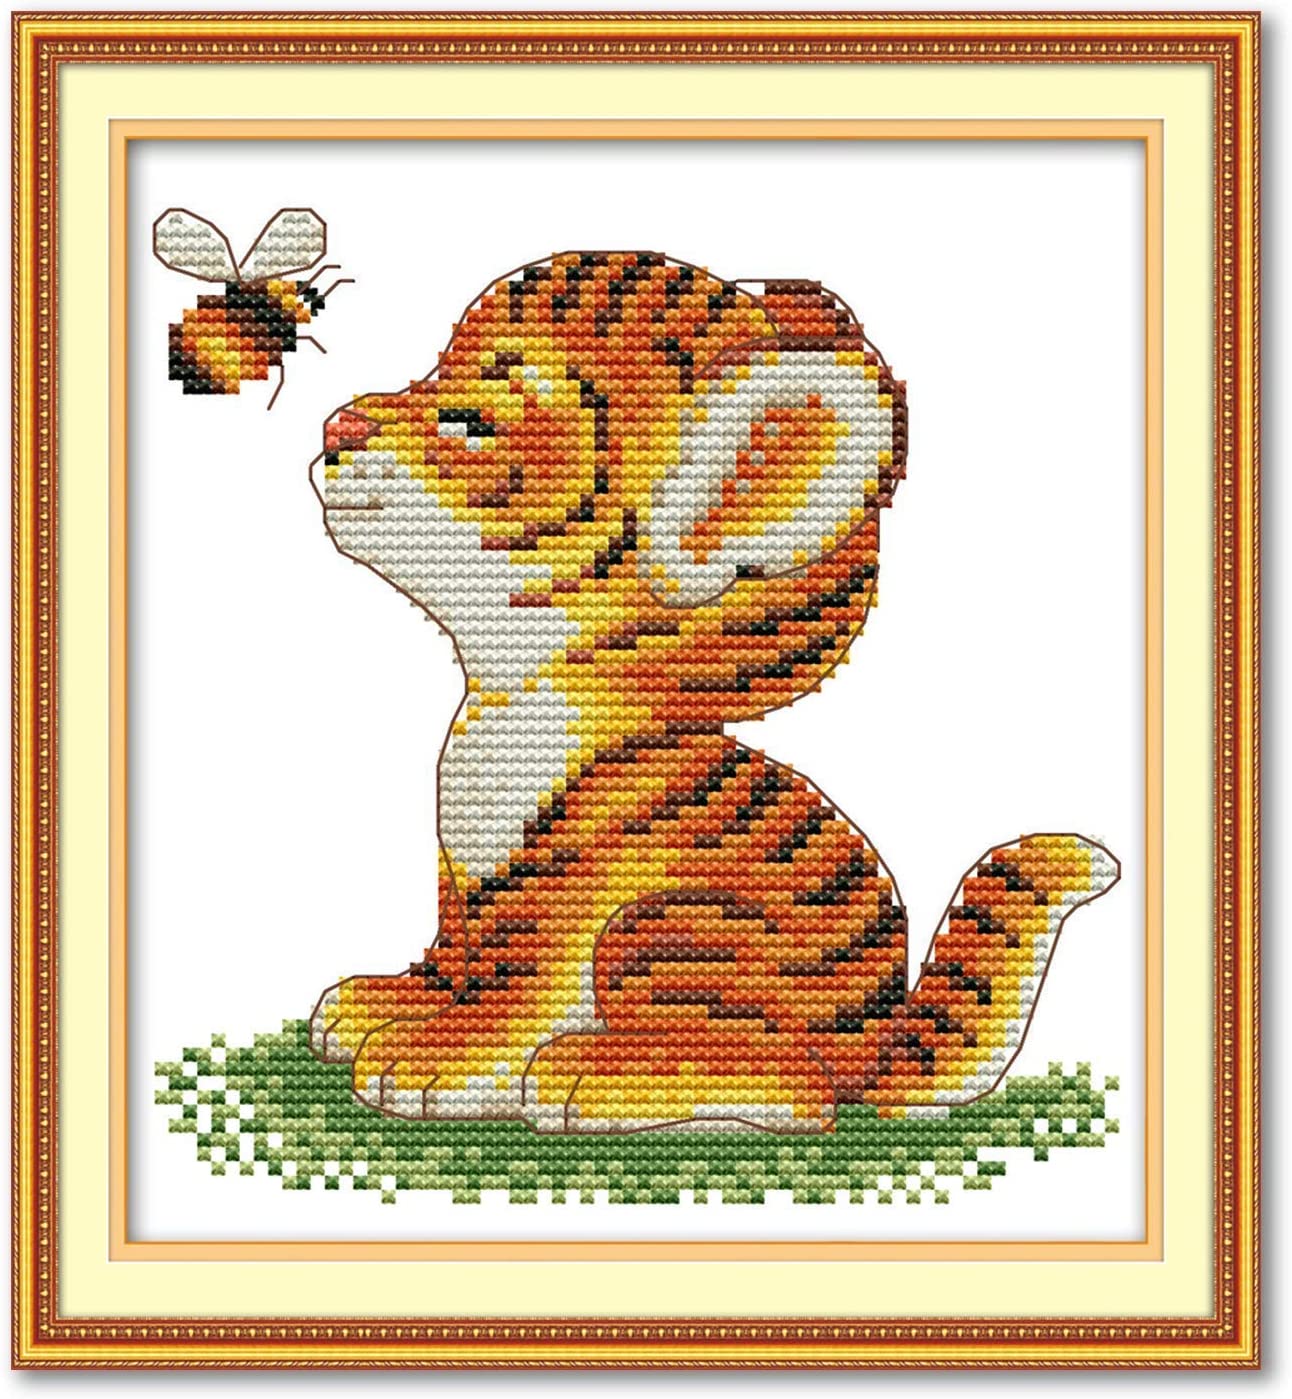 Printed Kits,Lighthouse Cross Stitch Counted Kits Stamped Kit Cross-Stitching Pattern for Home Decor 11CT Pre-Printed Fabric Embroidery Crafts Needlepoint Kit